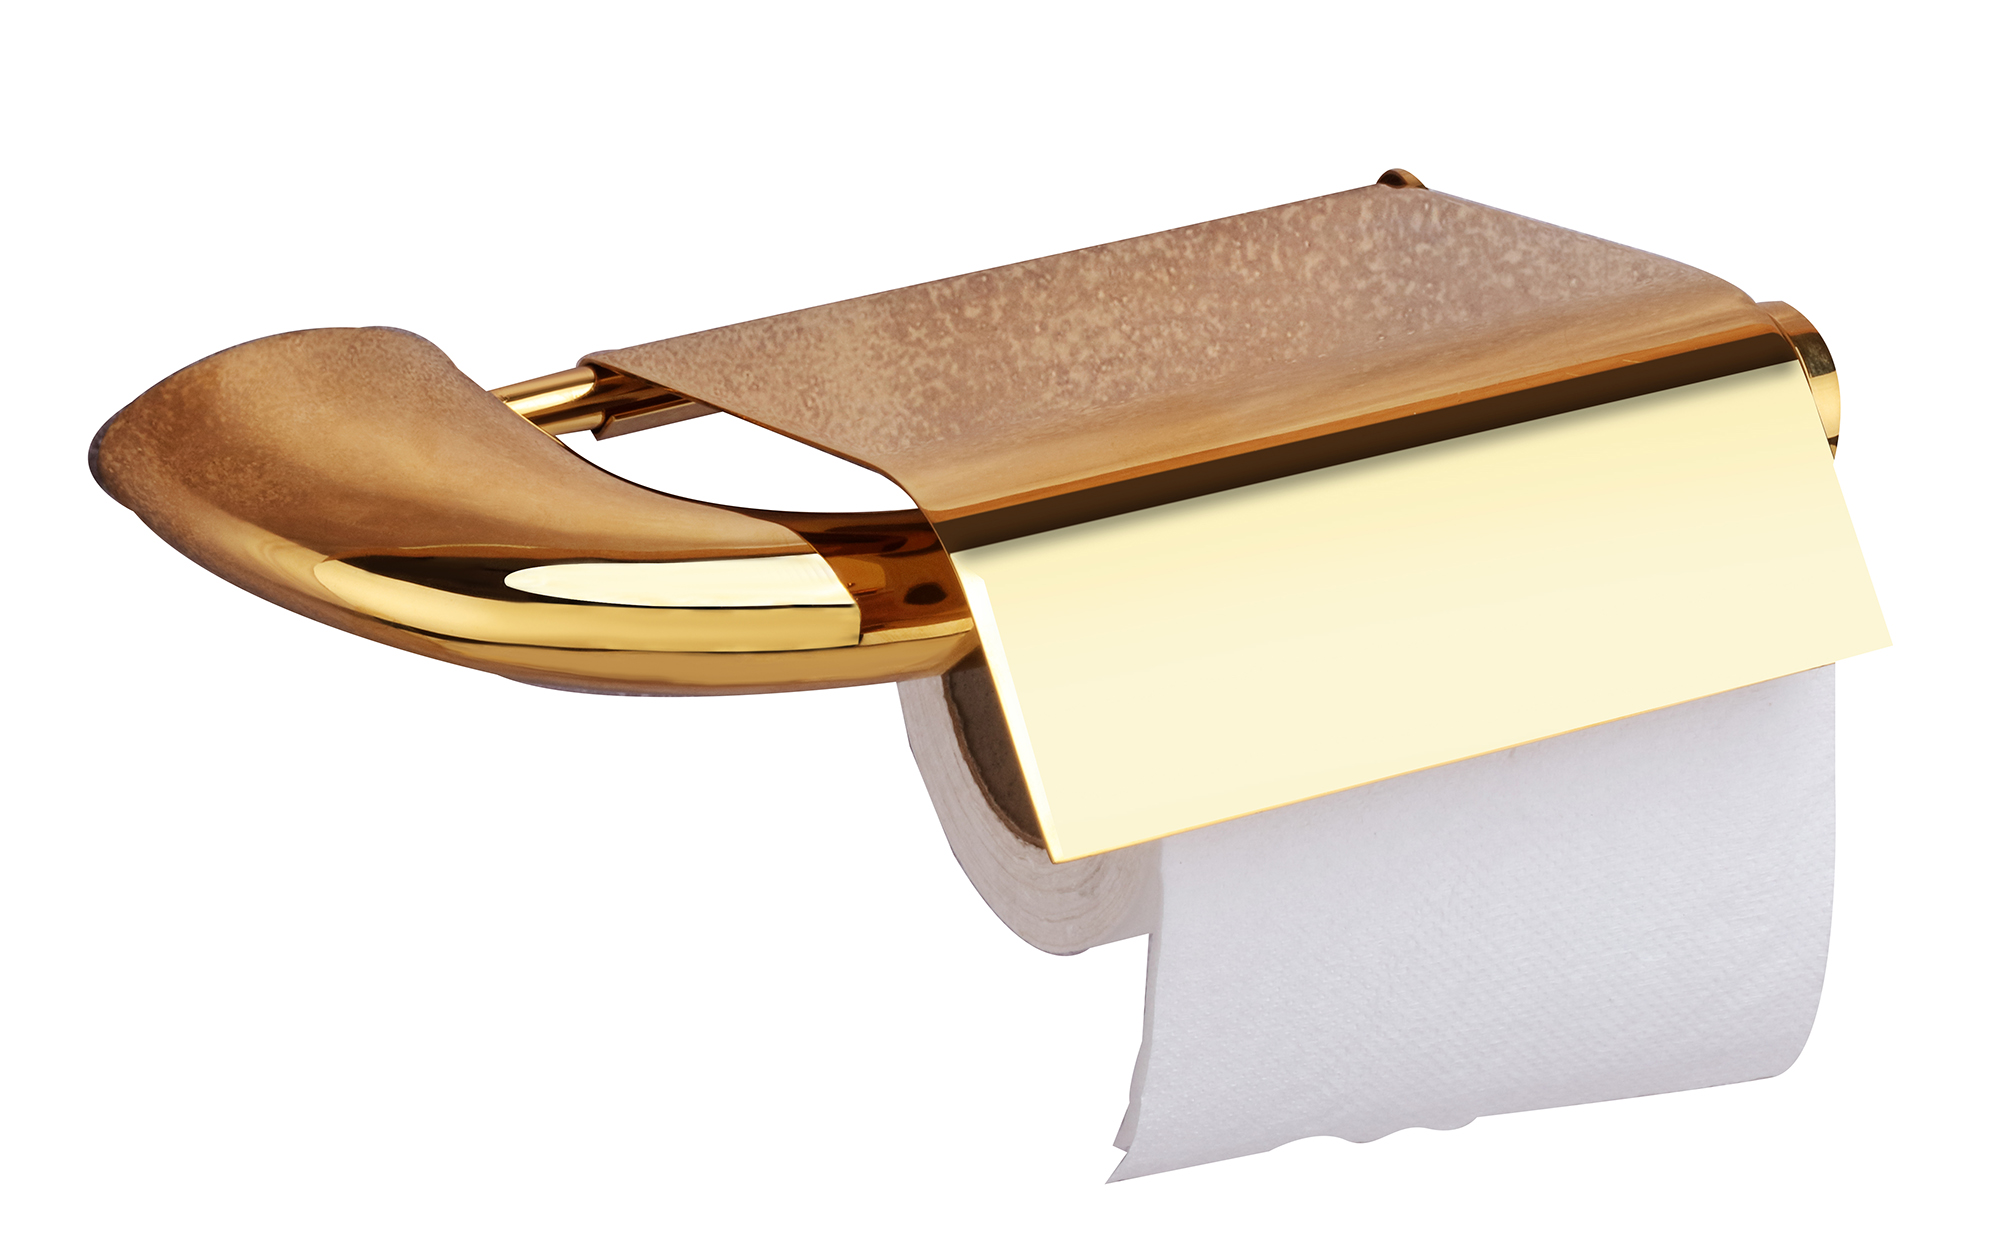 Aquieen Entice Wall Mounted Toilet Paper Holder With Flap Cover (Gold)